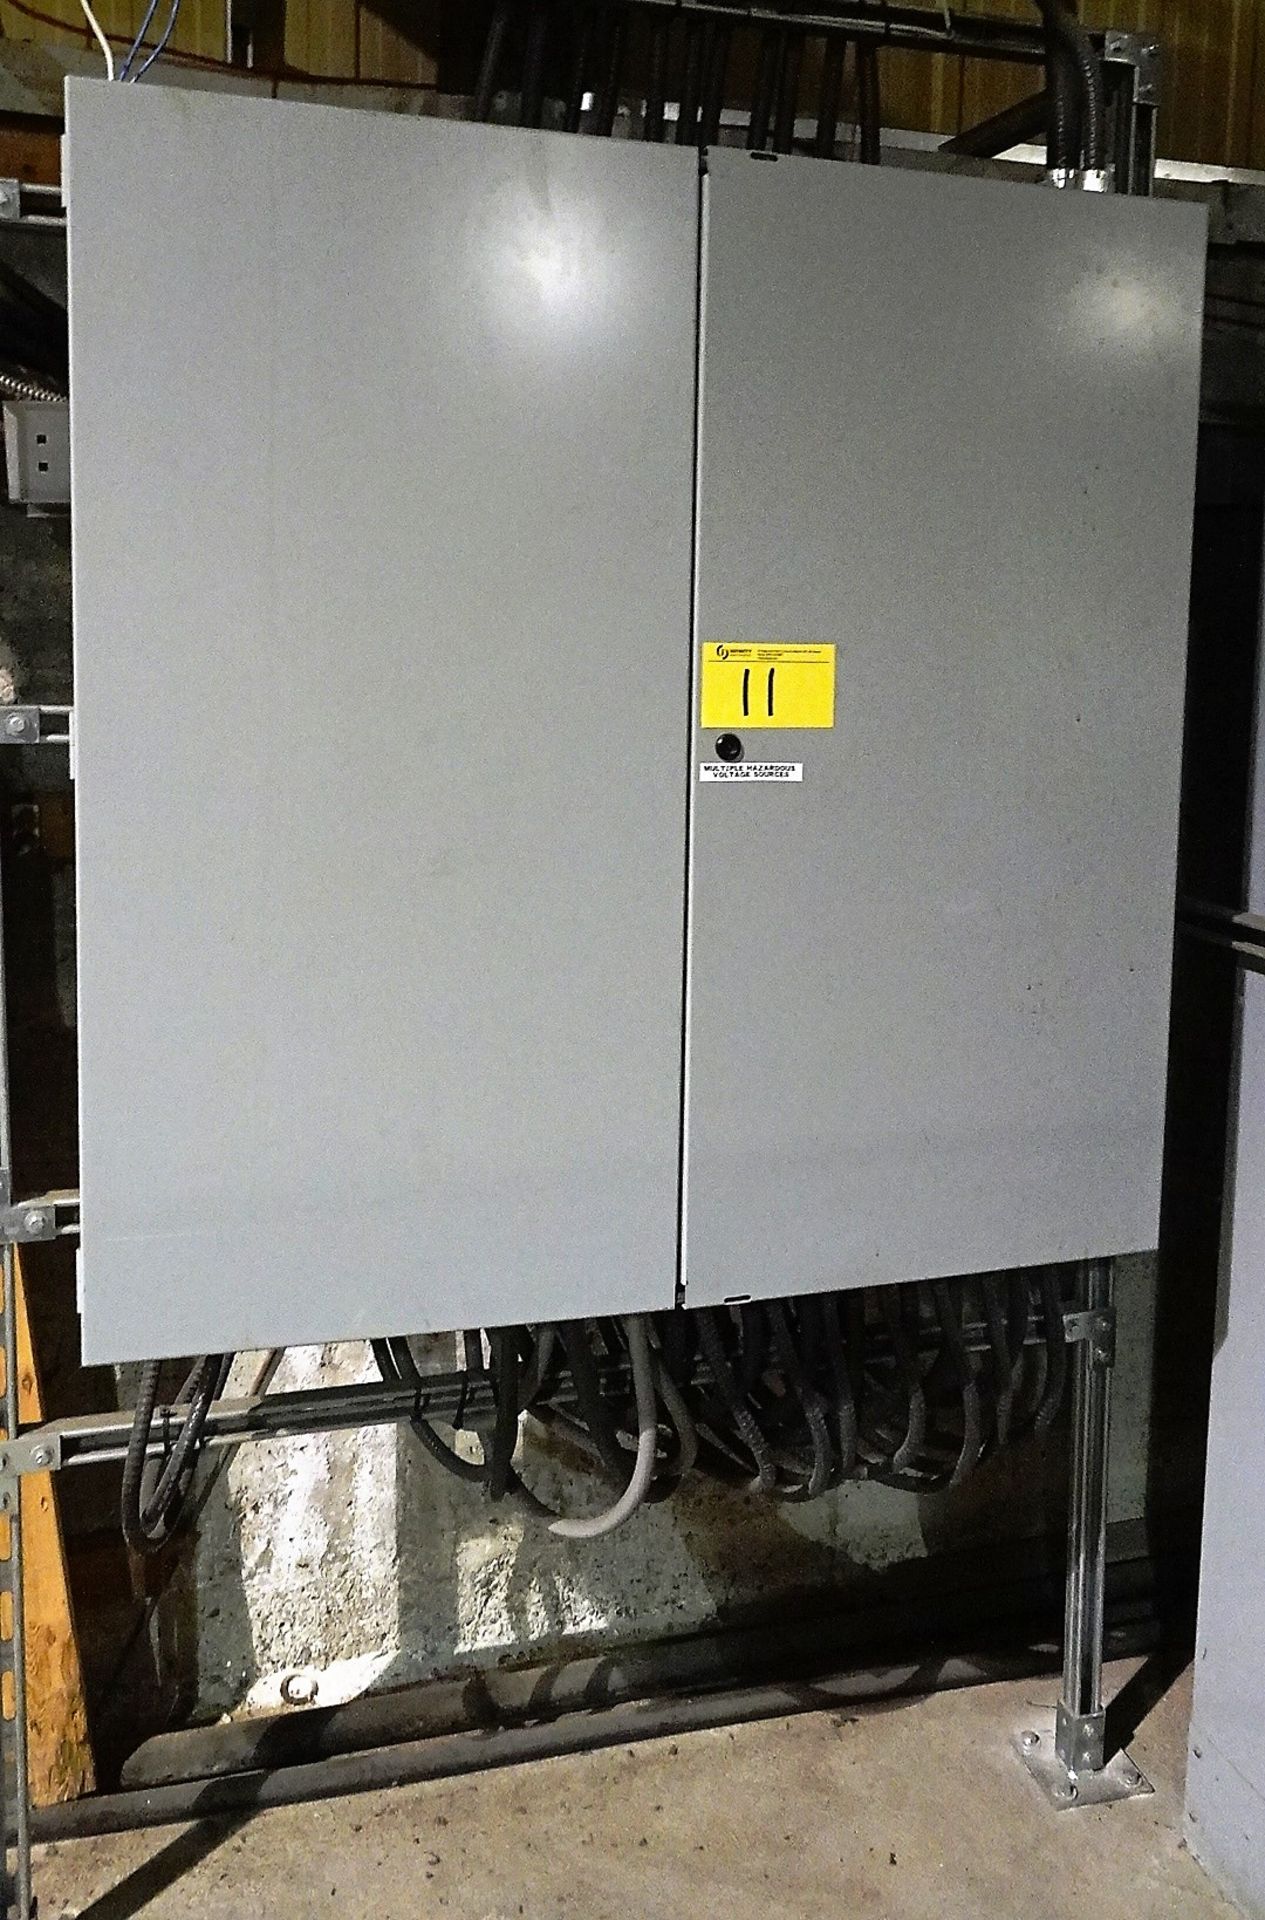 Multiple Hazardous Voltage Sources Cabinet c/w Contents (No Wire Coming Out of Panel) (Rigging